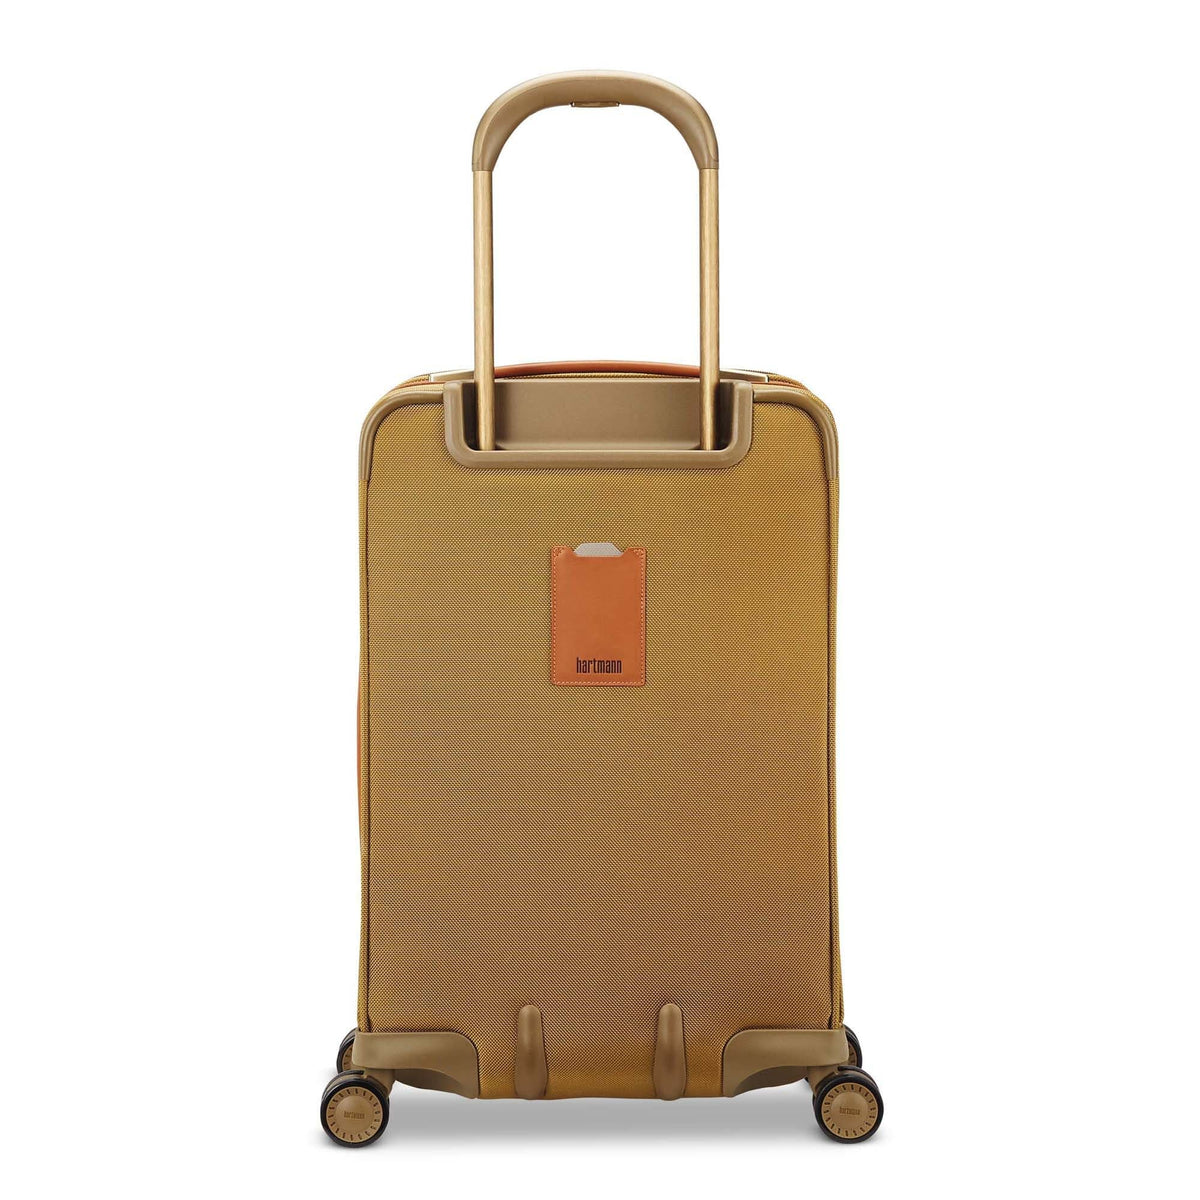 Hartmann Ratio Classic Deluxe 2 Softside Global Carry-On Expandable Spinner Luggage